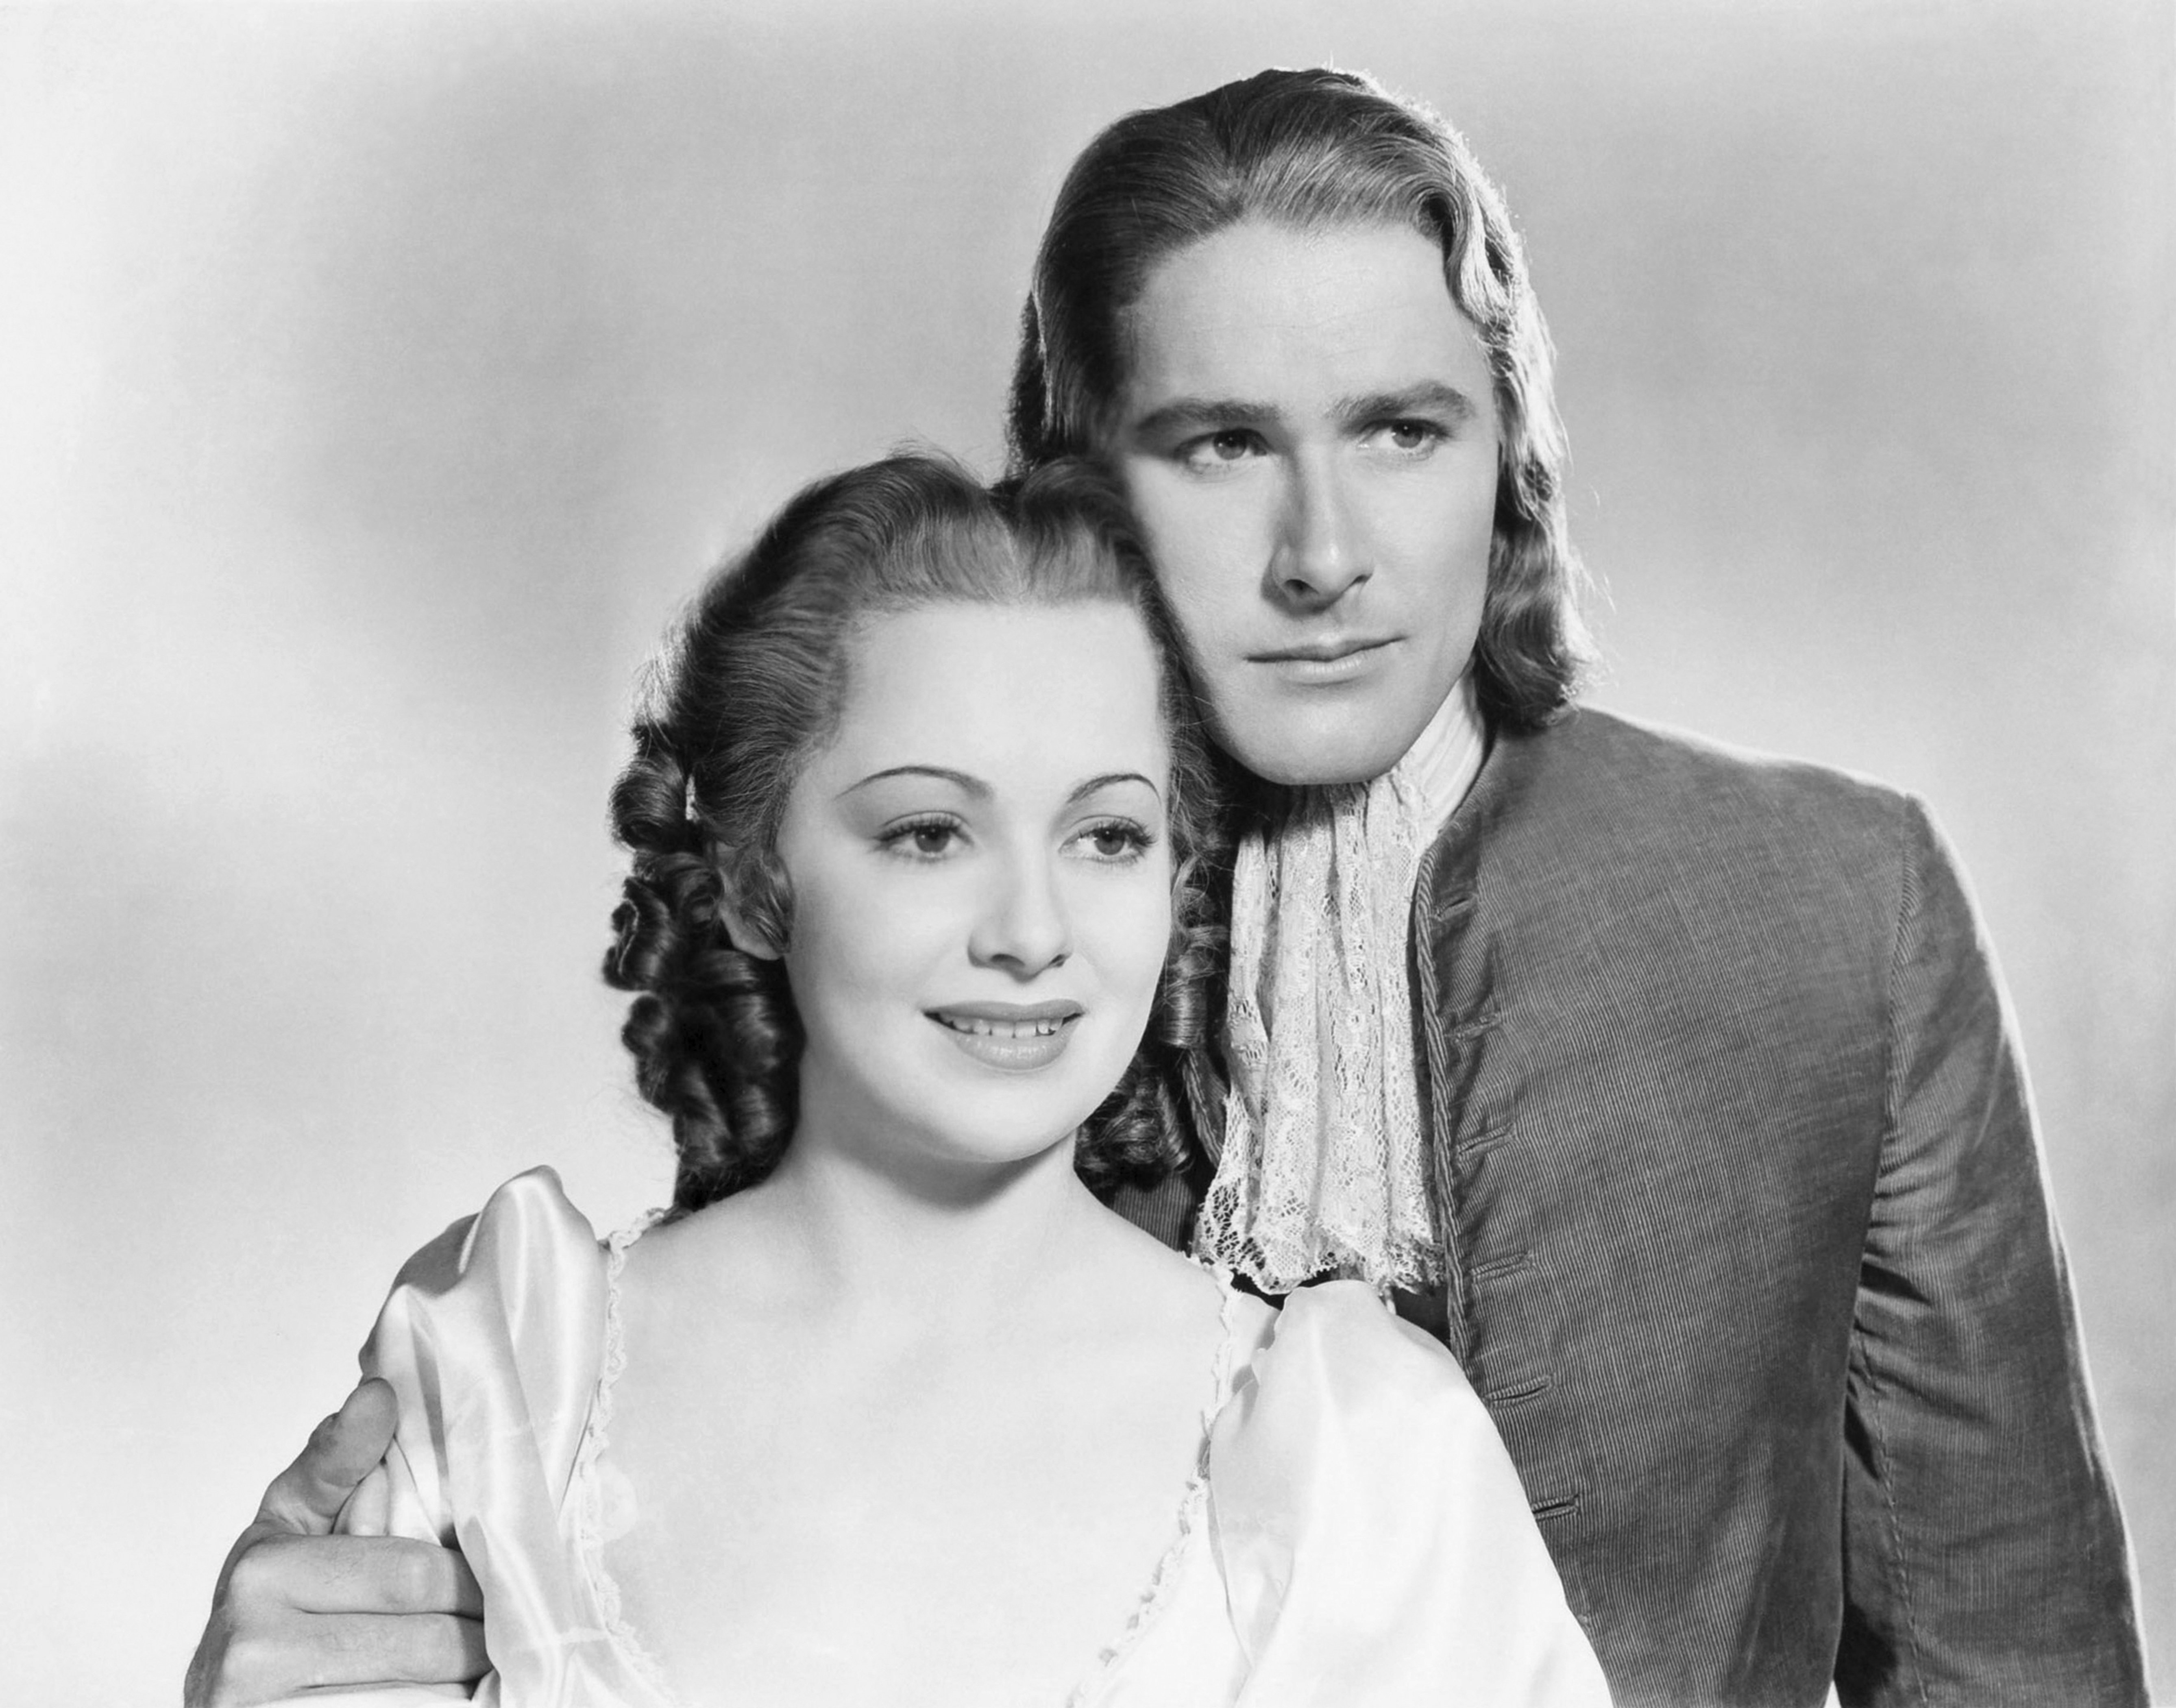 Actress Olivia de Havilland and Errol Flynn in a scene from the movie "Captain Blood" in 1935 | Source: Getty Images